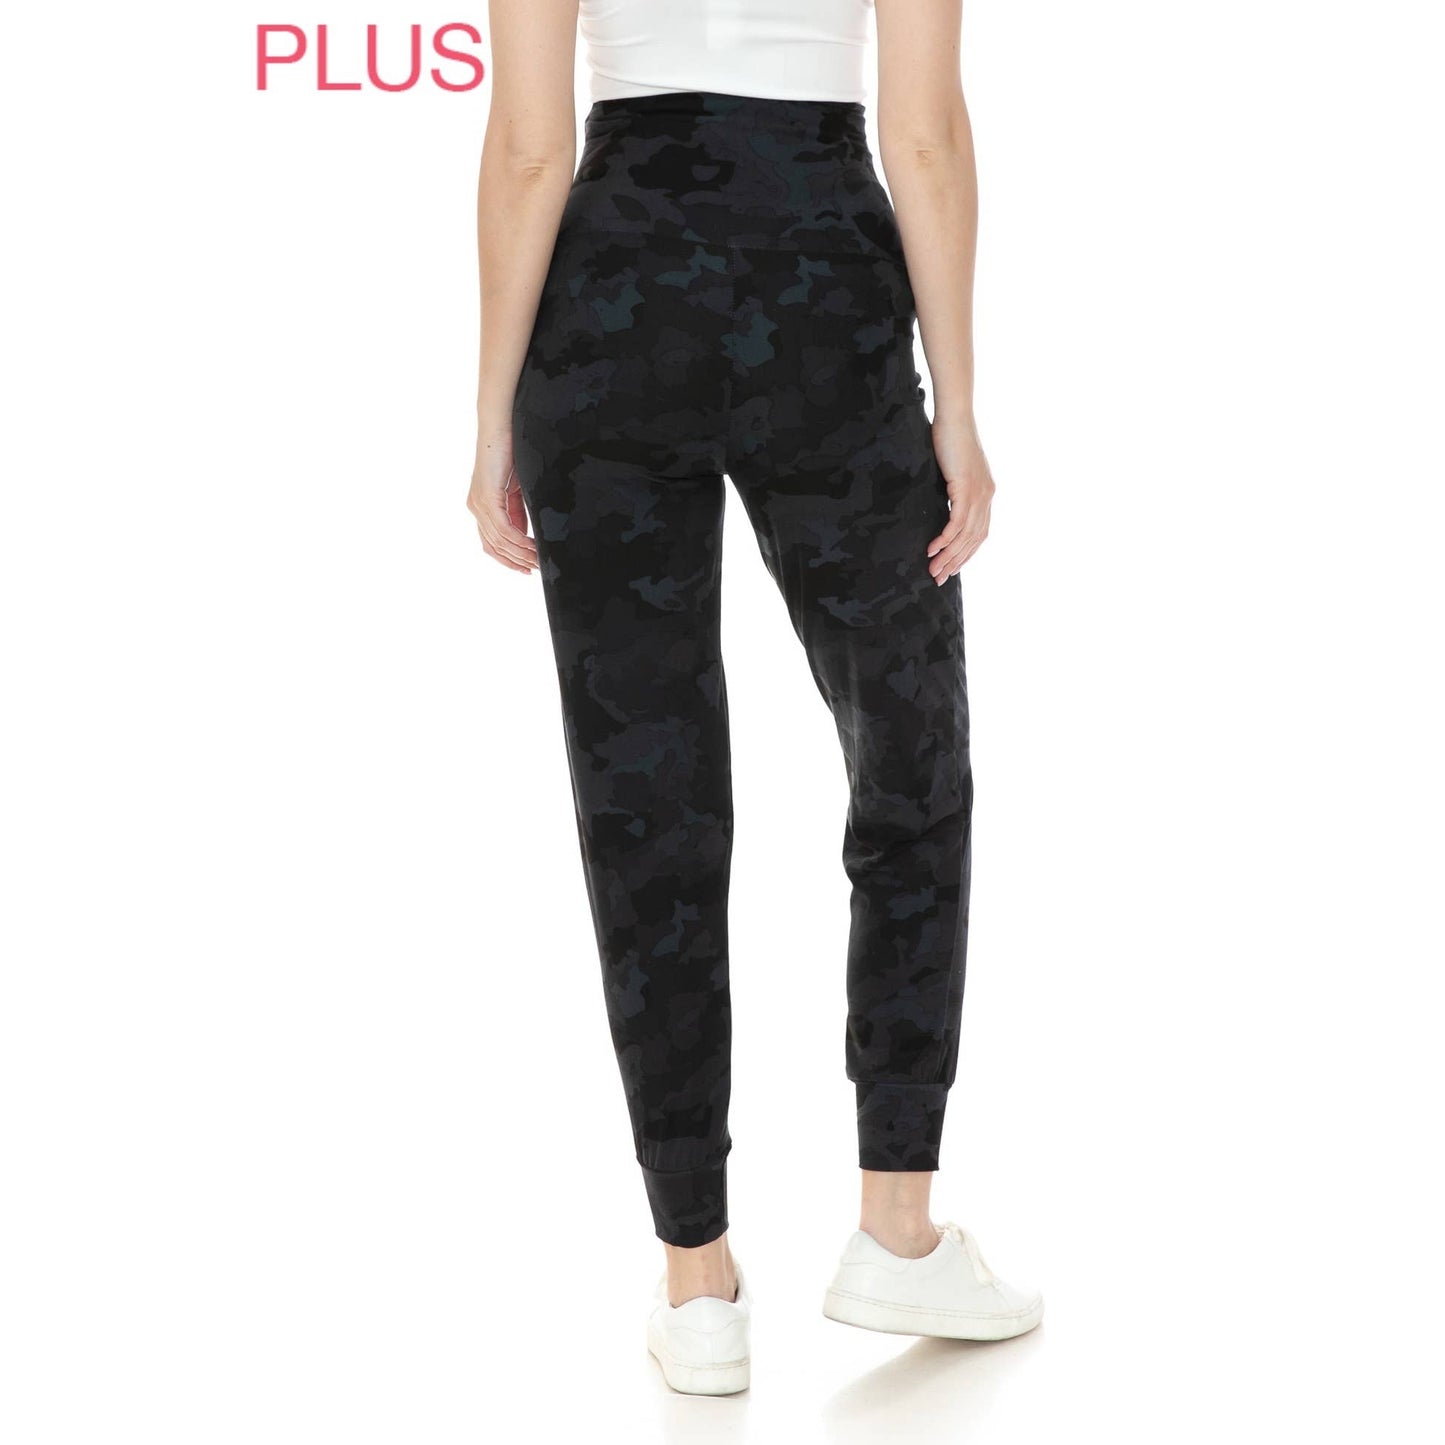 Plus Size Buttery Soft Maternity Comfort Print Joggers